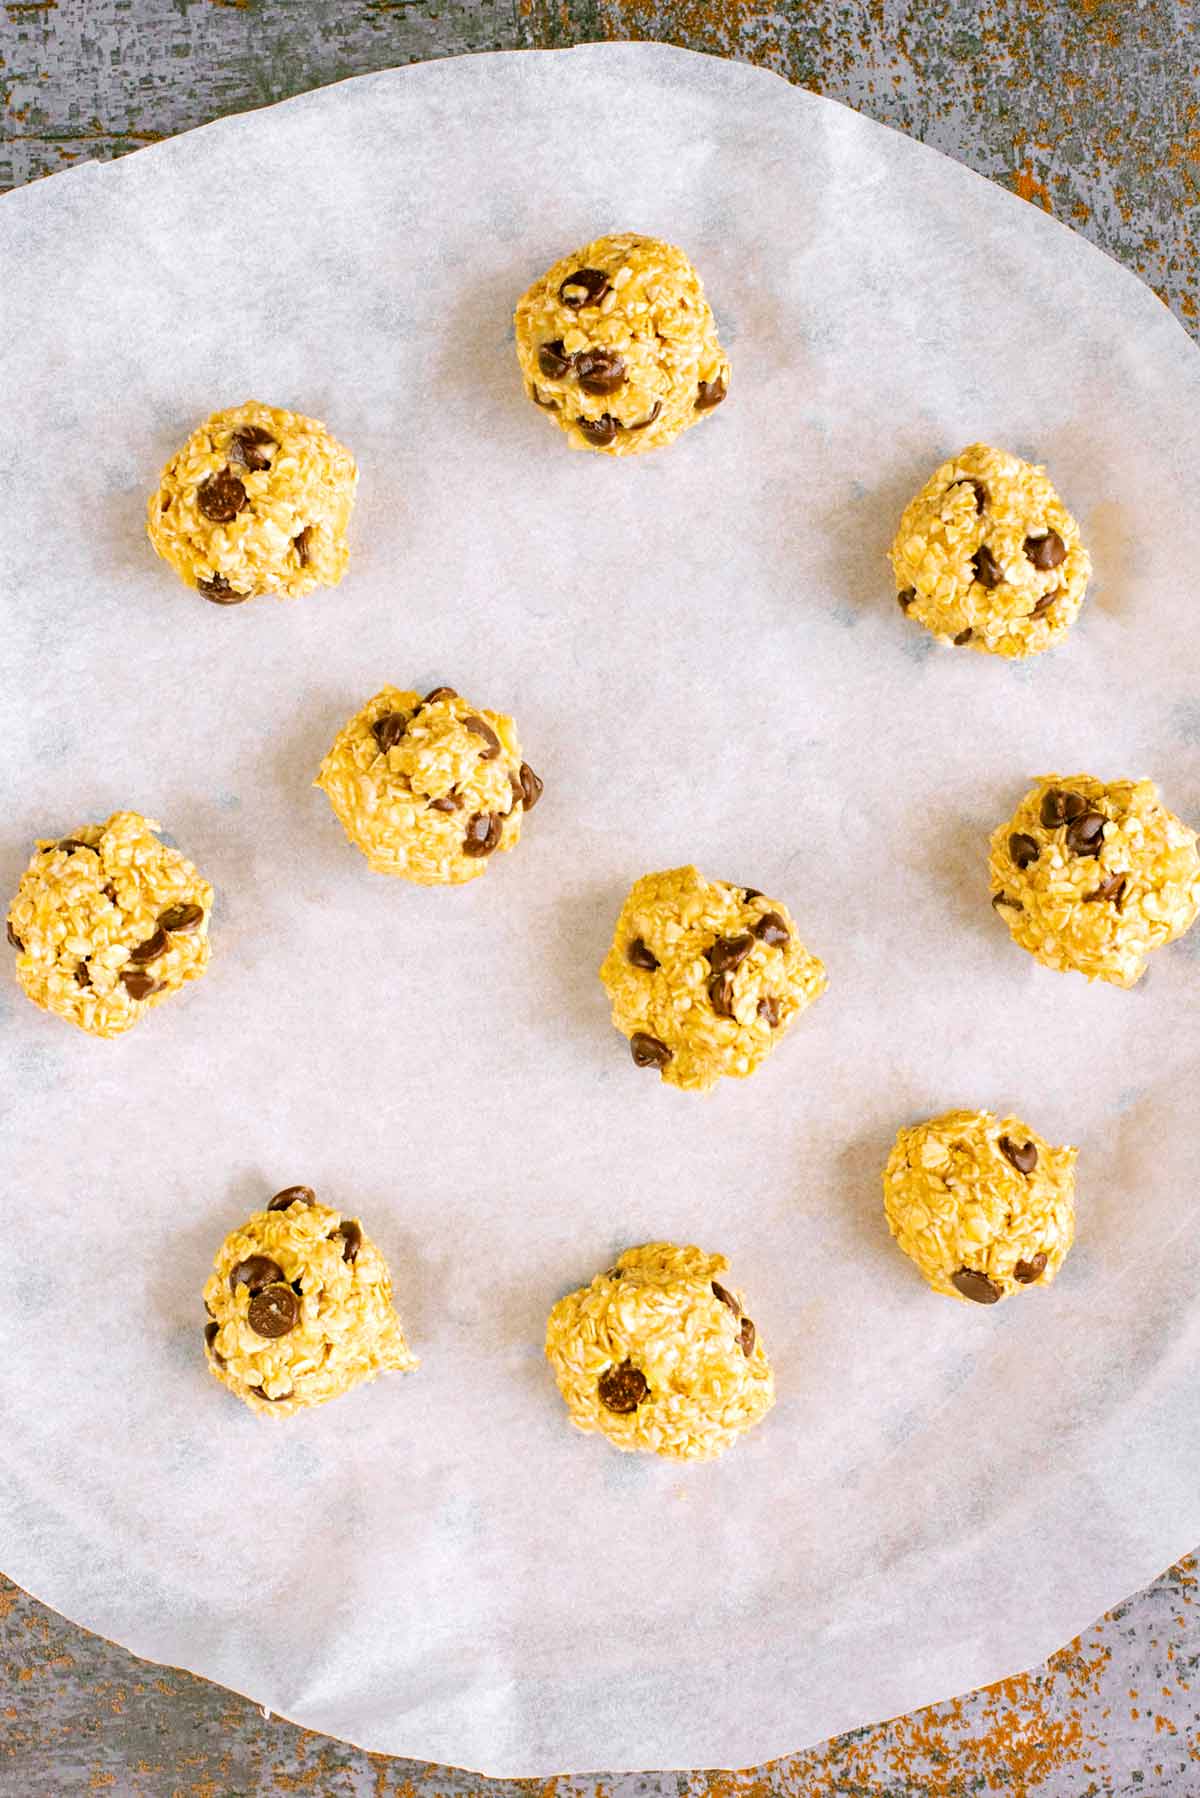 Ten balls of cookie dough on a lined baking tray.